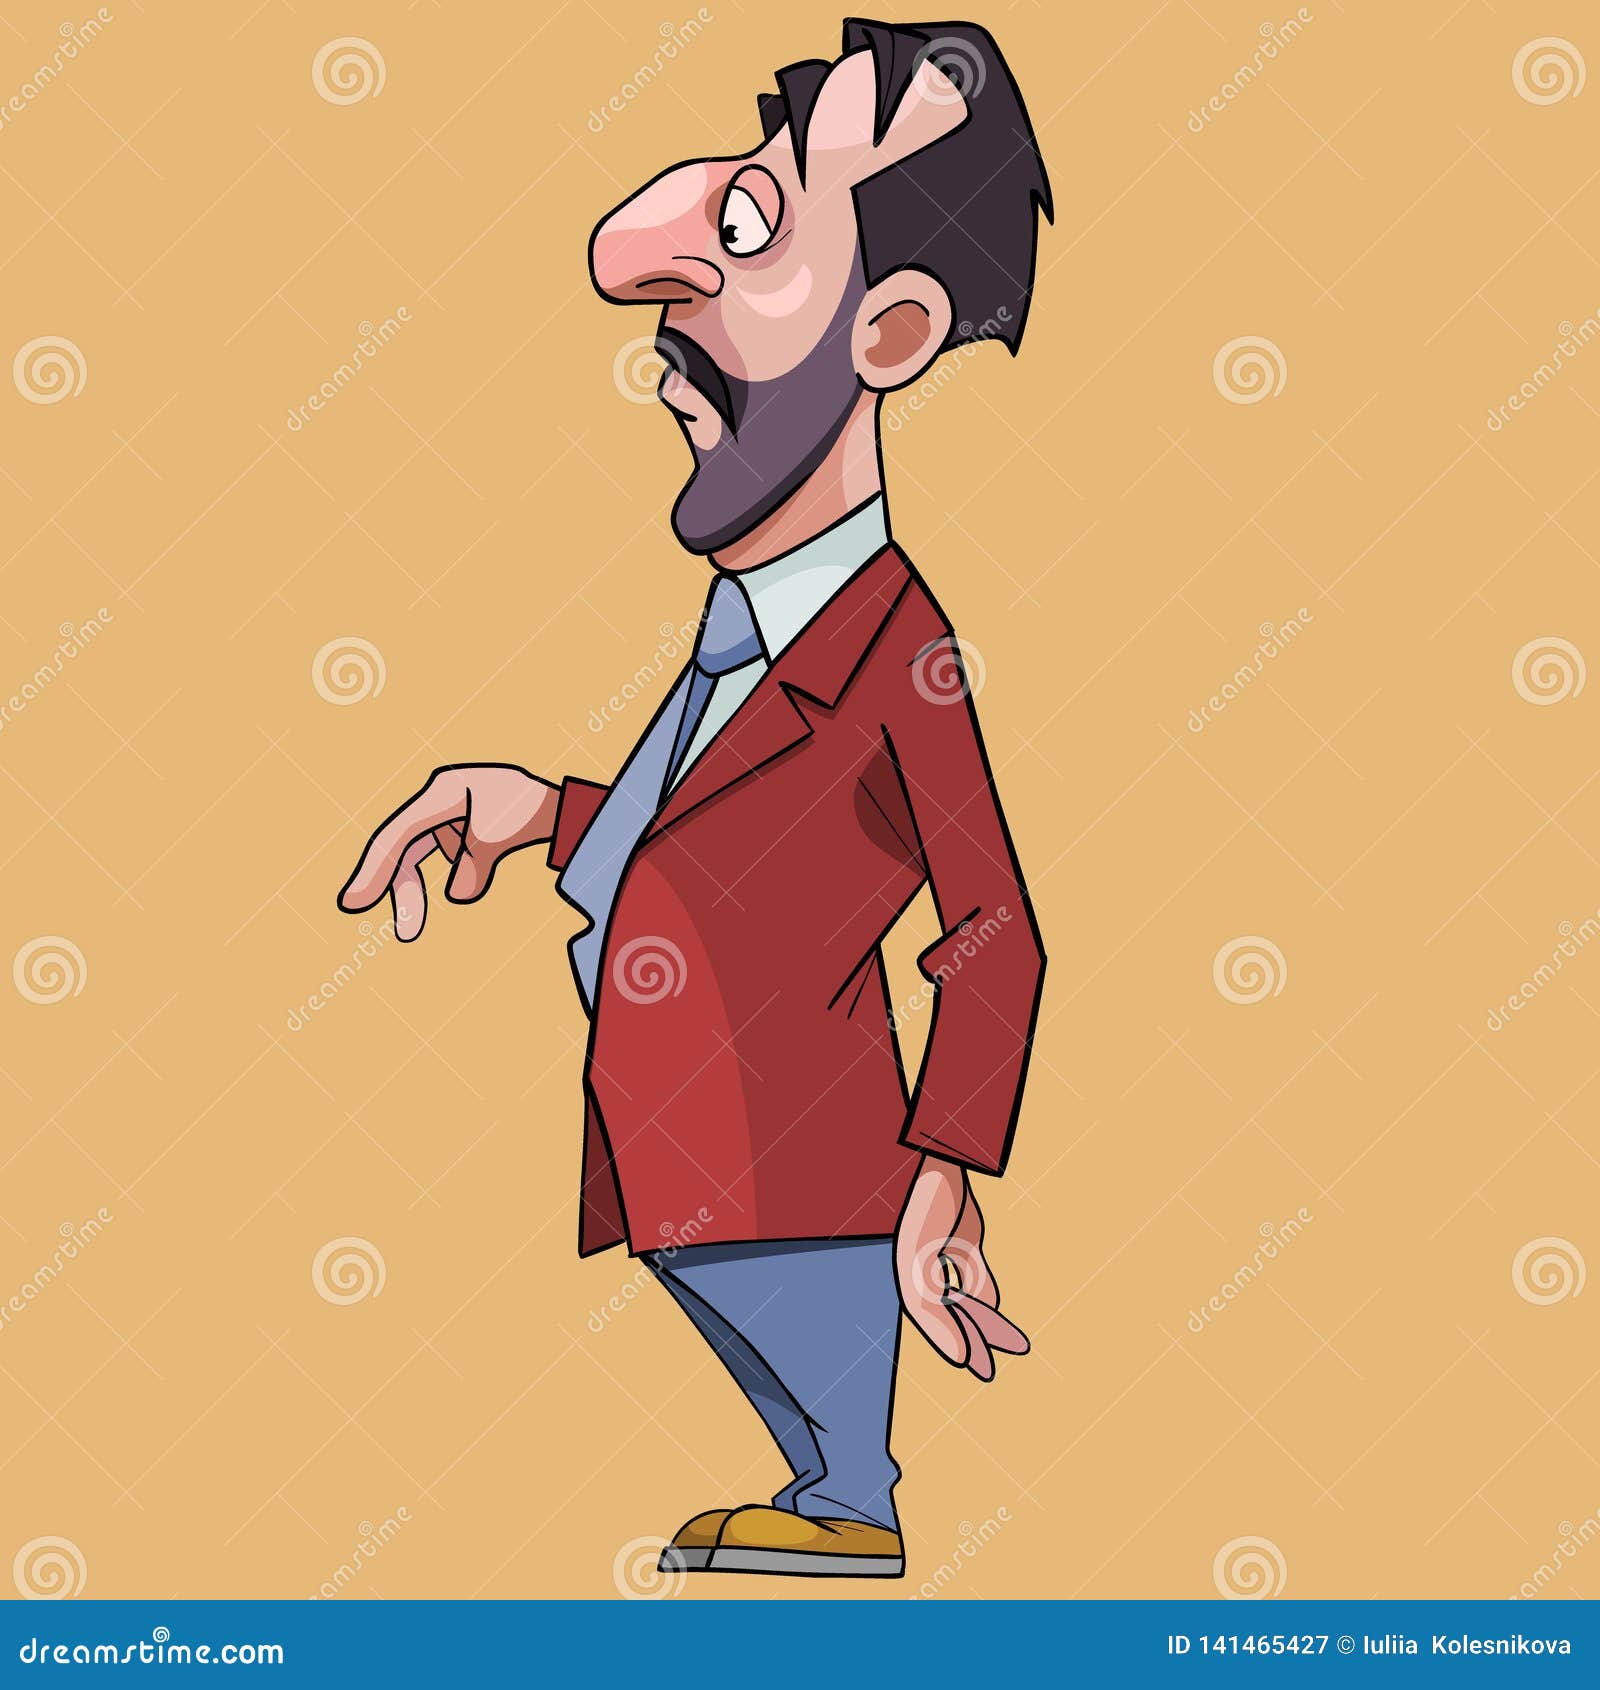 Cartoon Solid Man with a Big Nose in a Suit and Tie Stock Vector ...